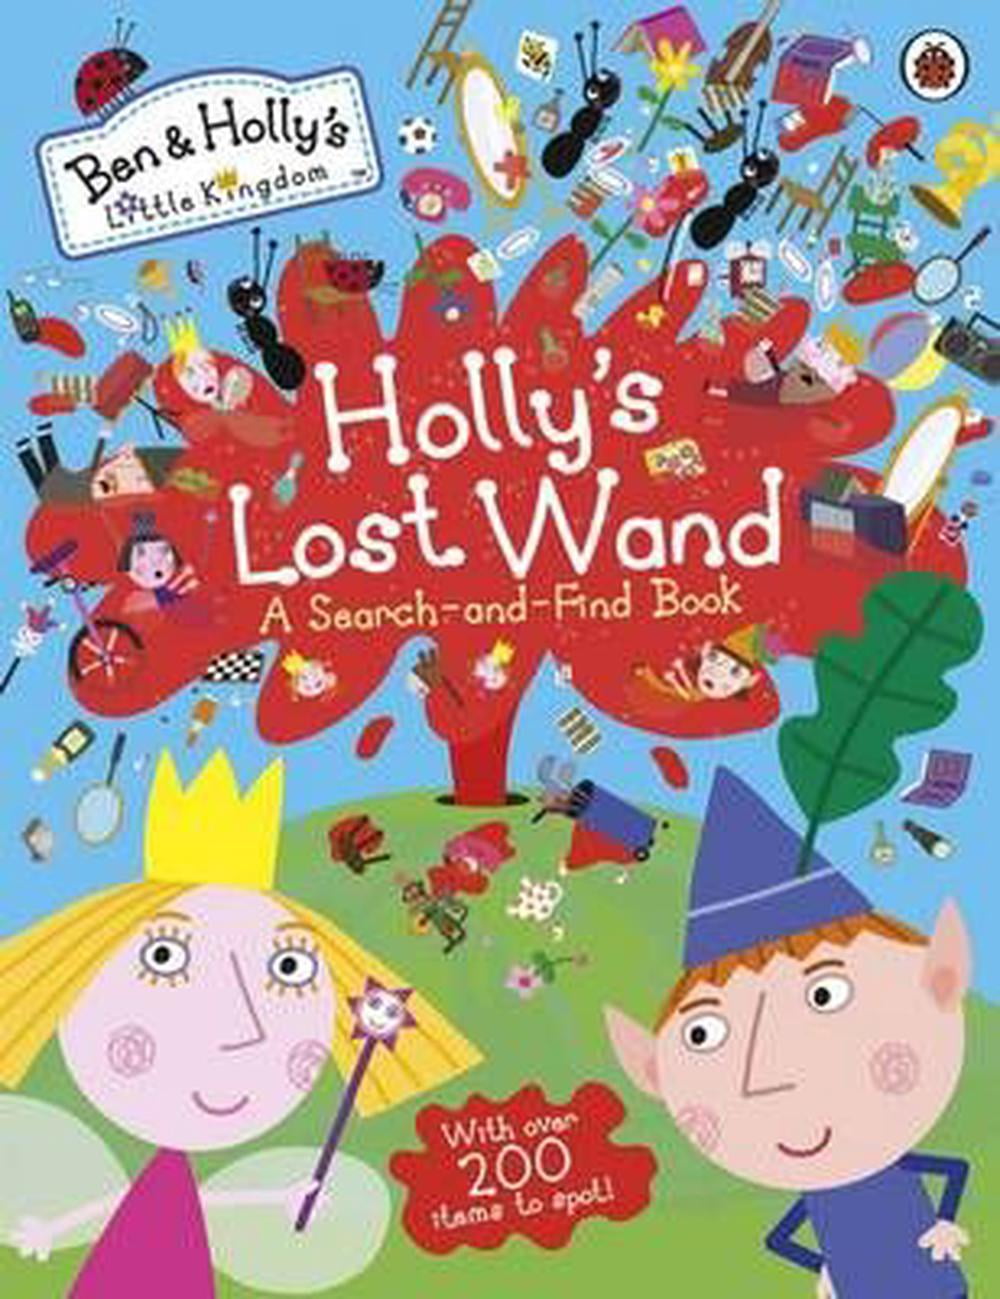 ben and holly's little kingdom holly's lost wand  a